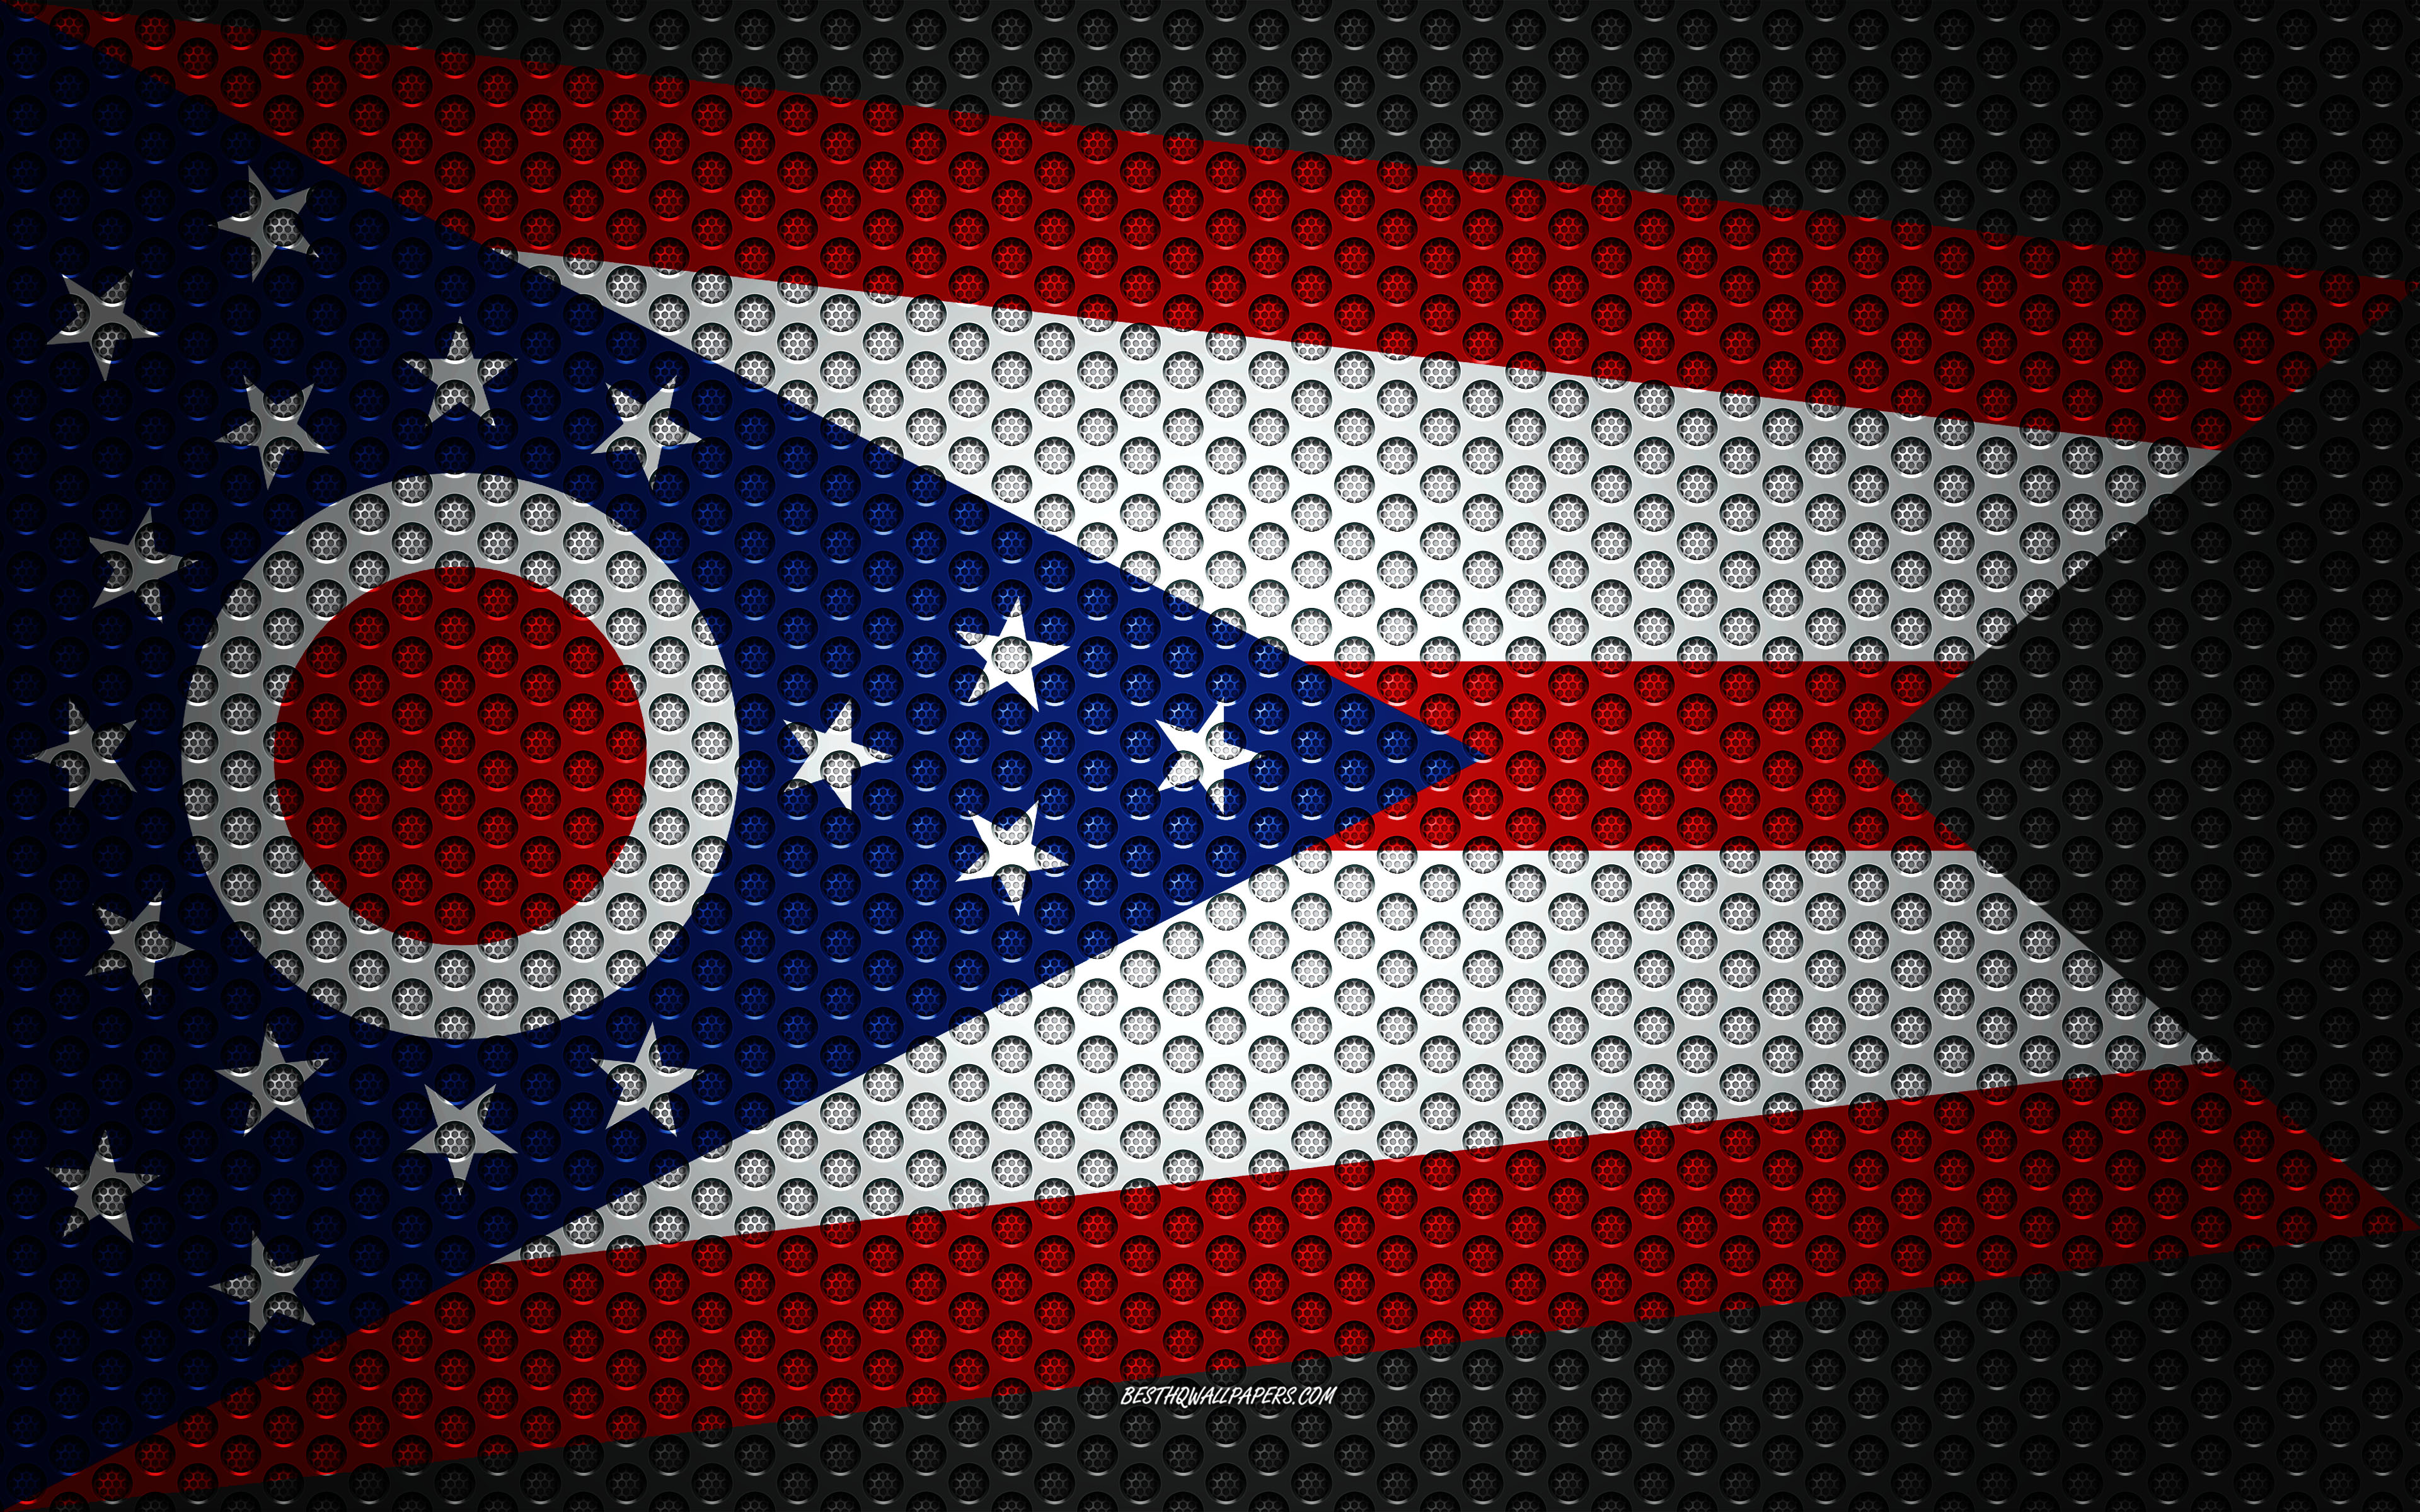 Download wallpaper Flag of Ohio, 4k, American state, creative art, metal mesh texture, Ohio flag, national symbol, Ohio, USA, flags of American states for desktop with resolution 3840x2400. High Quality HD picture